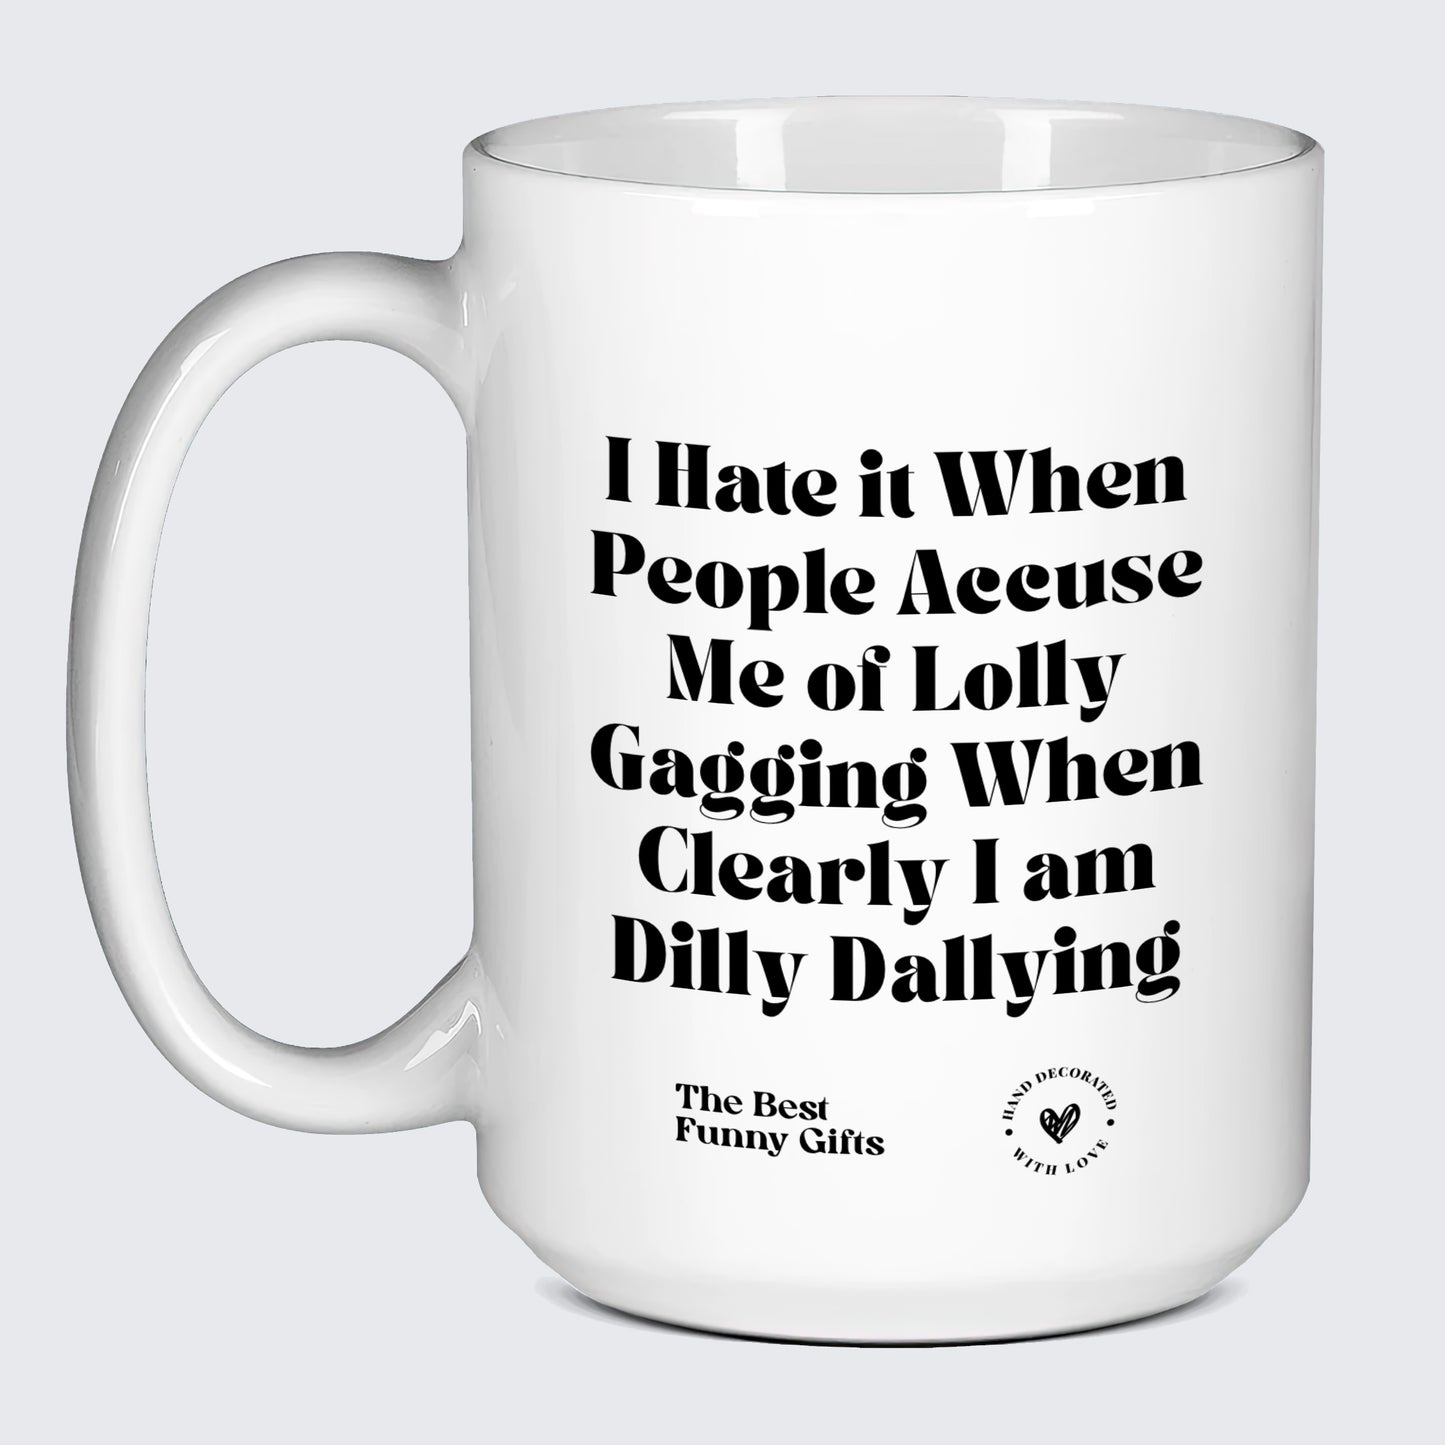 Funny Mugs I Hate It When People Accuse Me of Lolly Gagging When Clearly I Am Dilly Dallying - The Best Funny Gifts